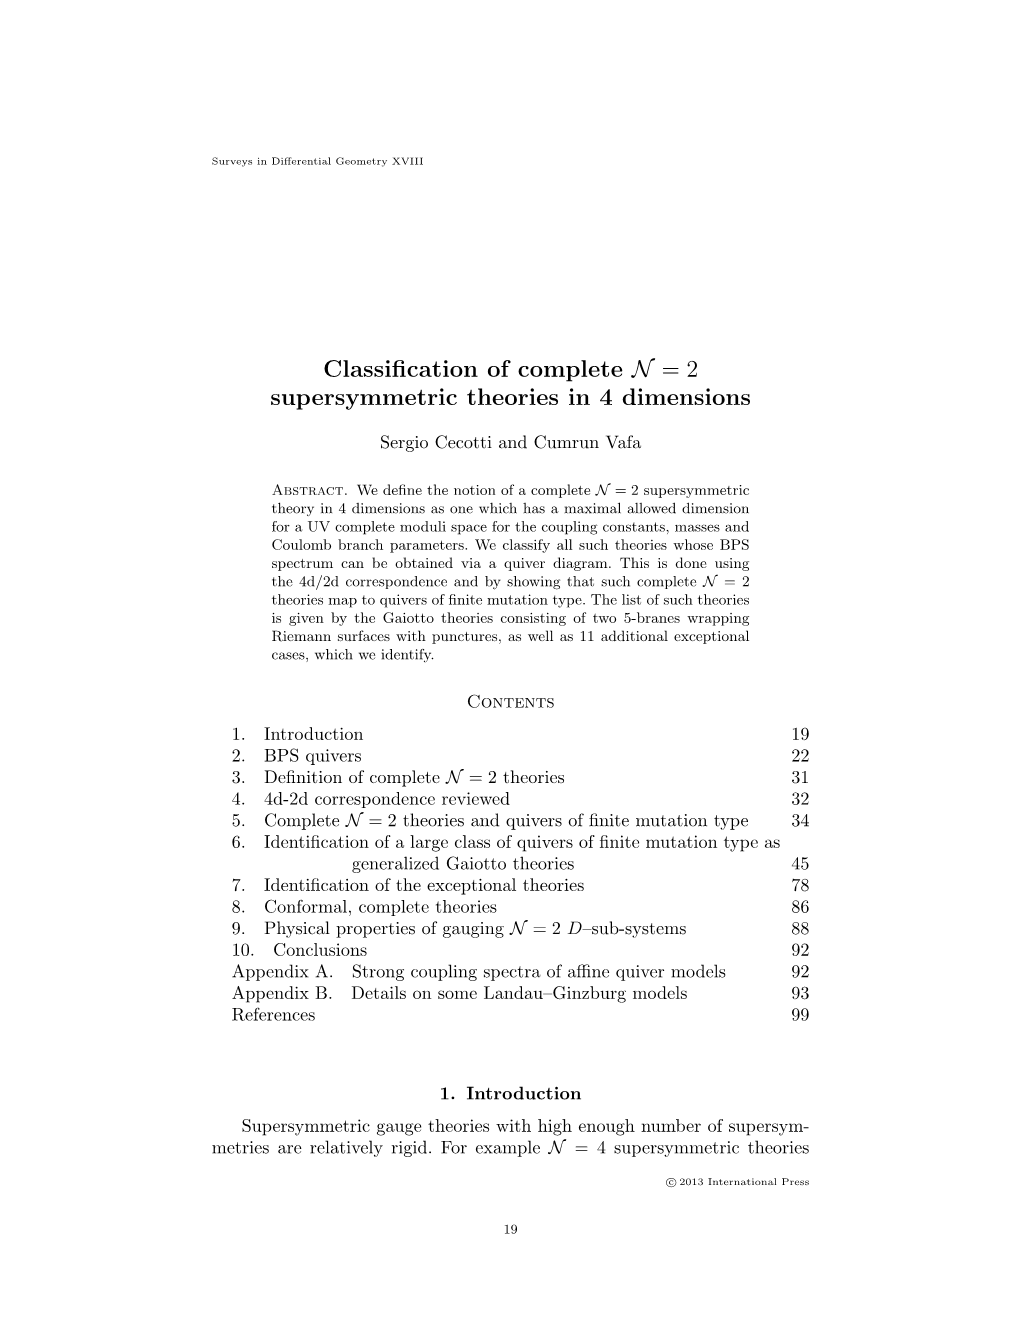 Classification of Complete N = 2 Supersymmetric Theories in 4